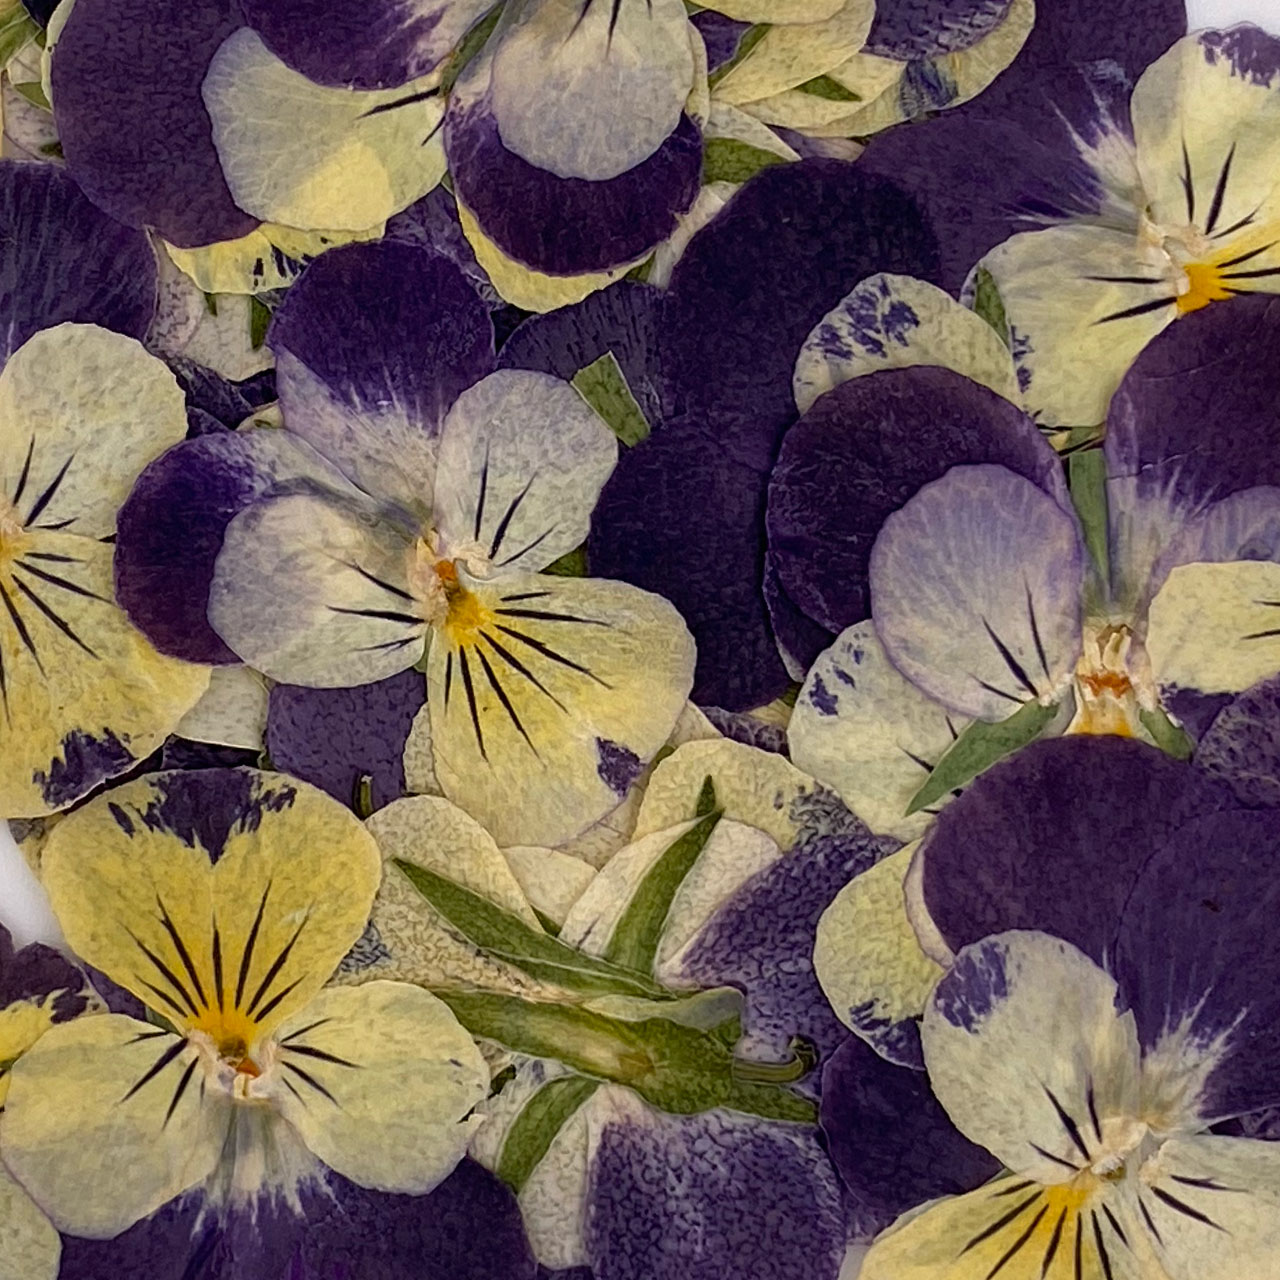 Close-up shot of white, yellow, and purple violet flower petals.